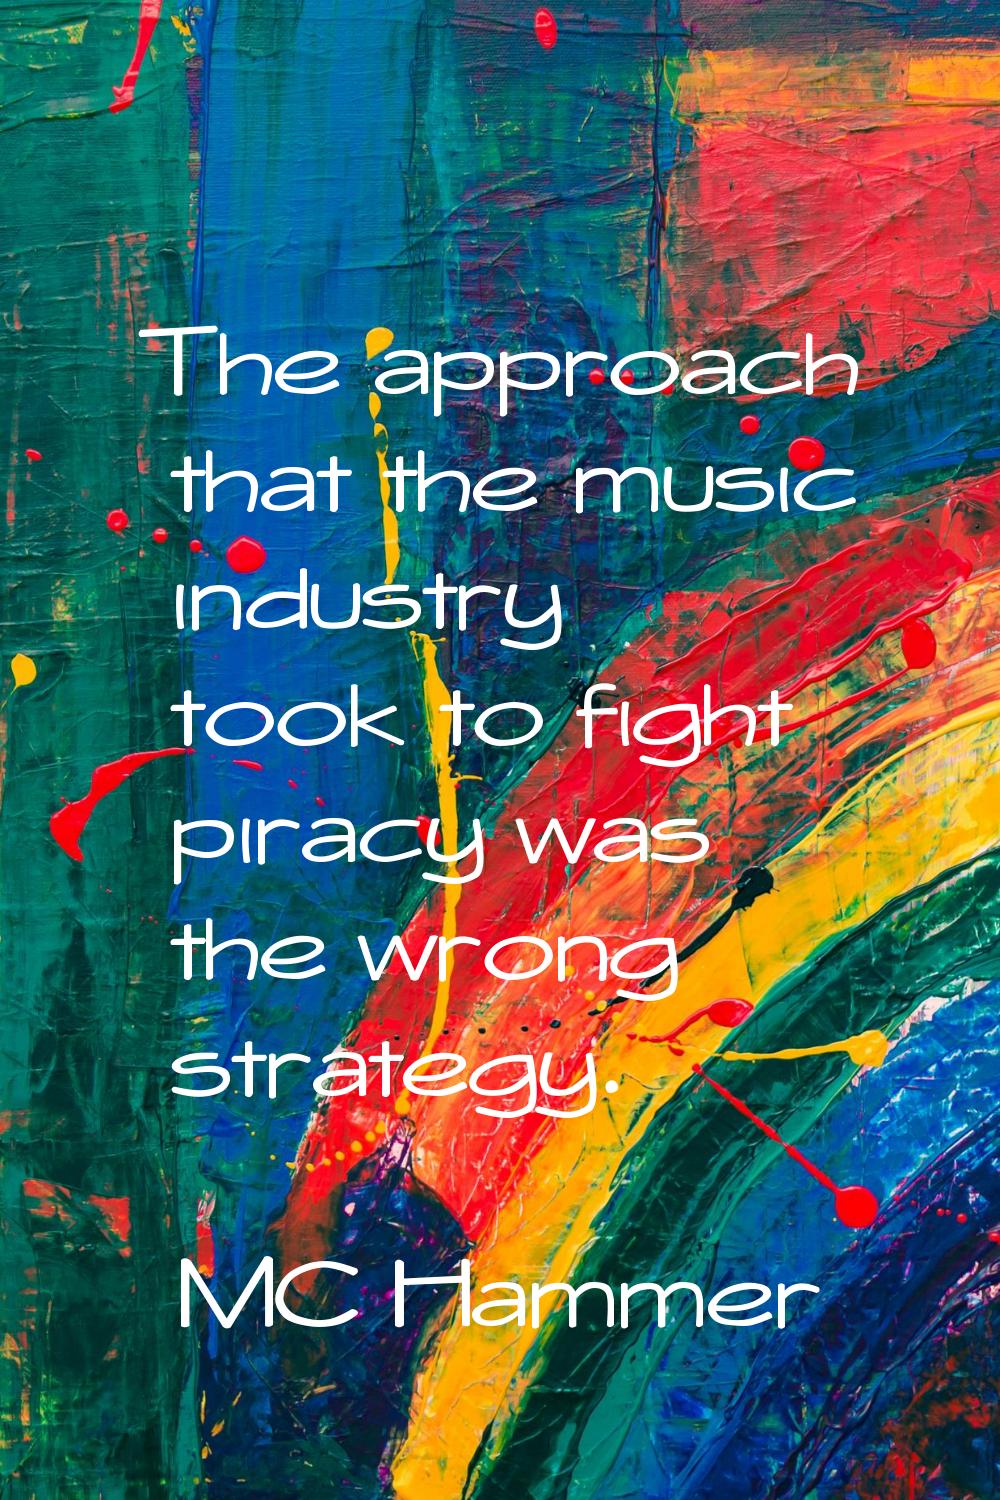 The approach that the music industry took to fight piracy was the wrong strategy.